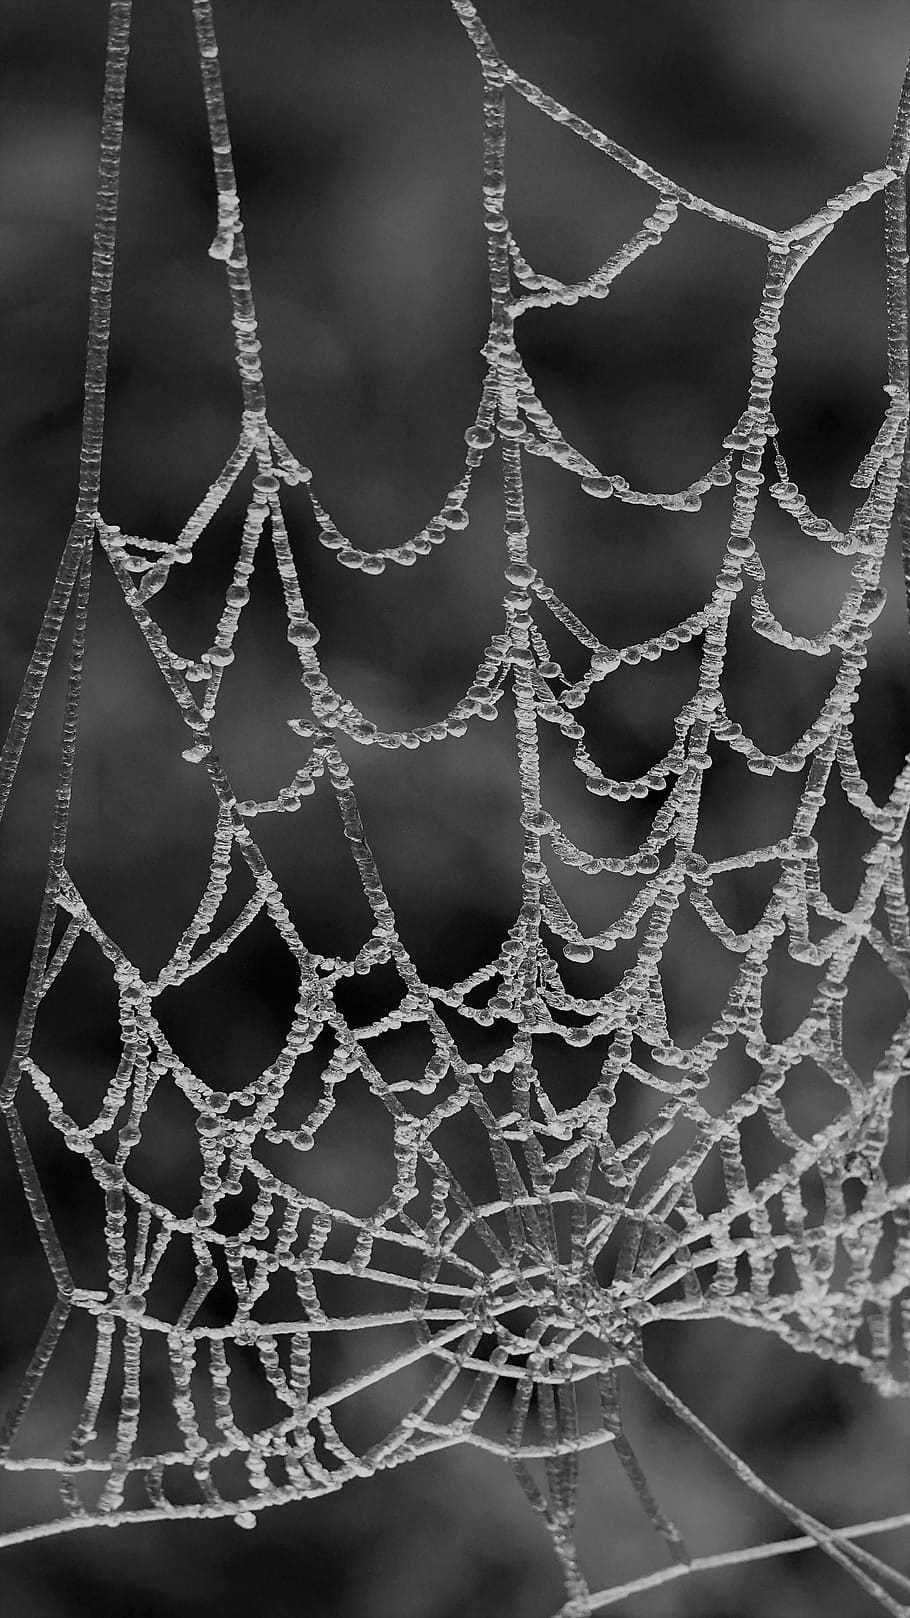 spider web, spin, cobweb, web, pattern, dew, ice, focus on foreground, close-up, water